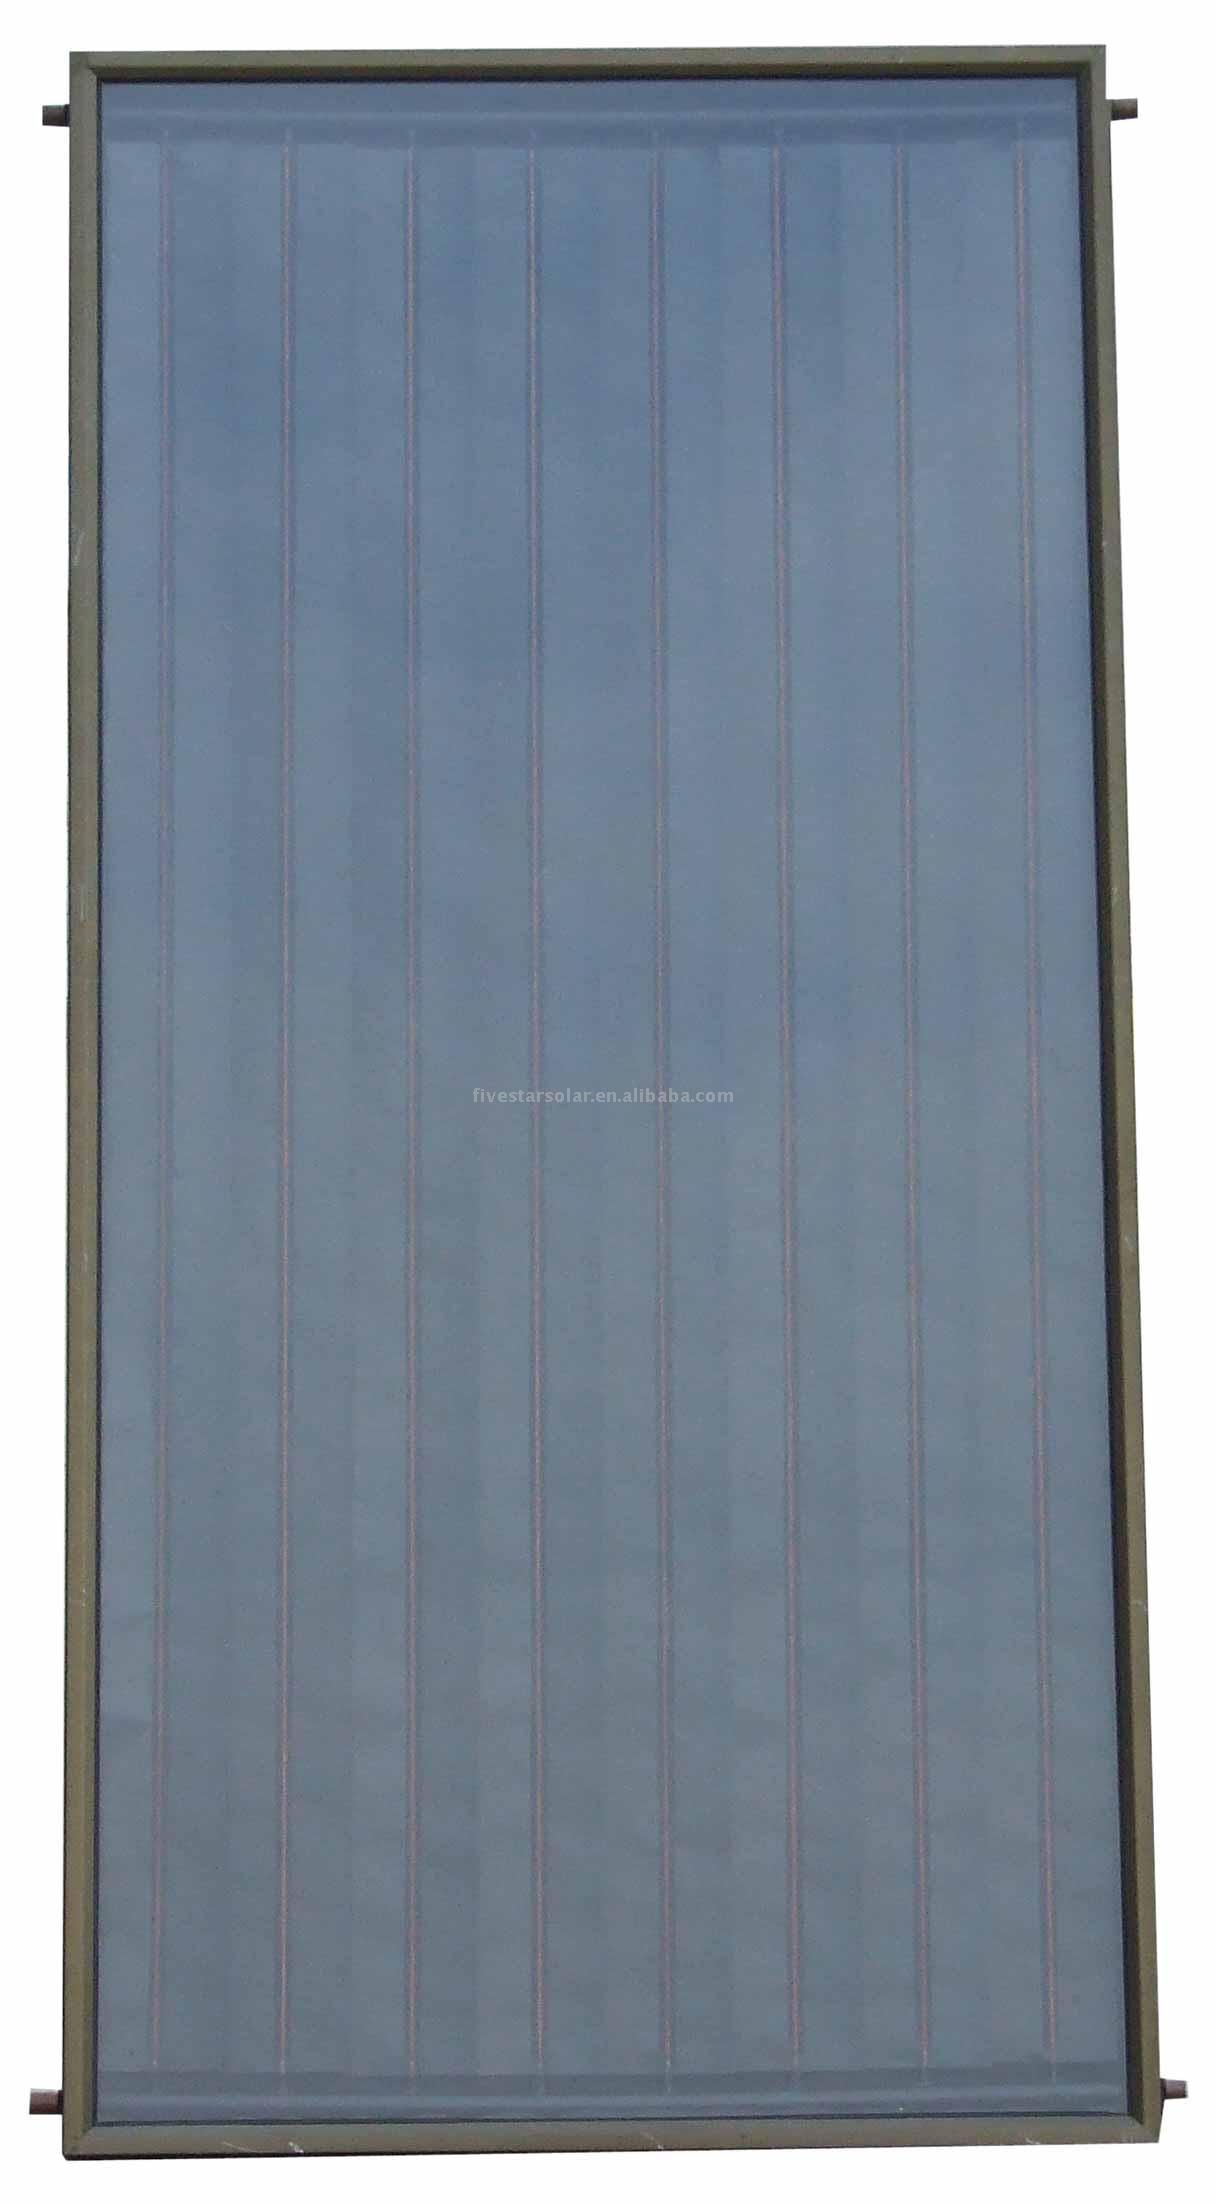  FP2.0 Flat Plate Solar Collector ( FP2.0 Flat Plate Solar Collector)